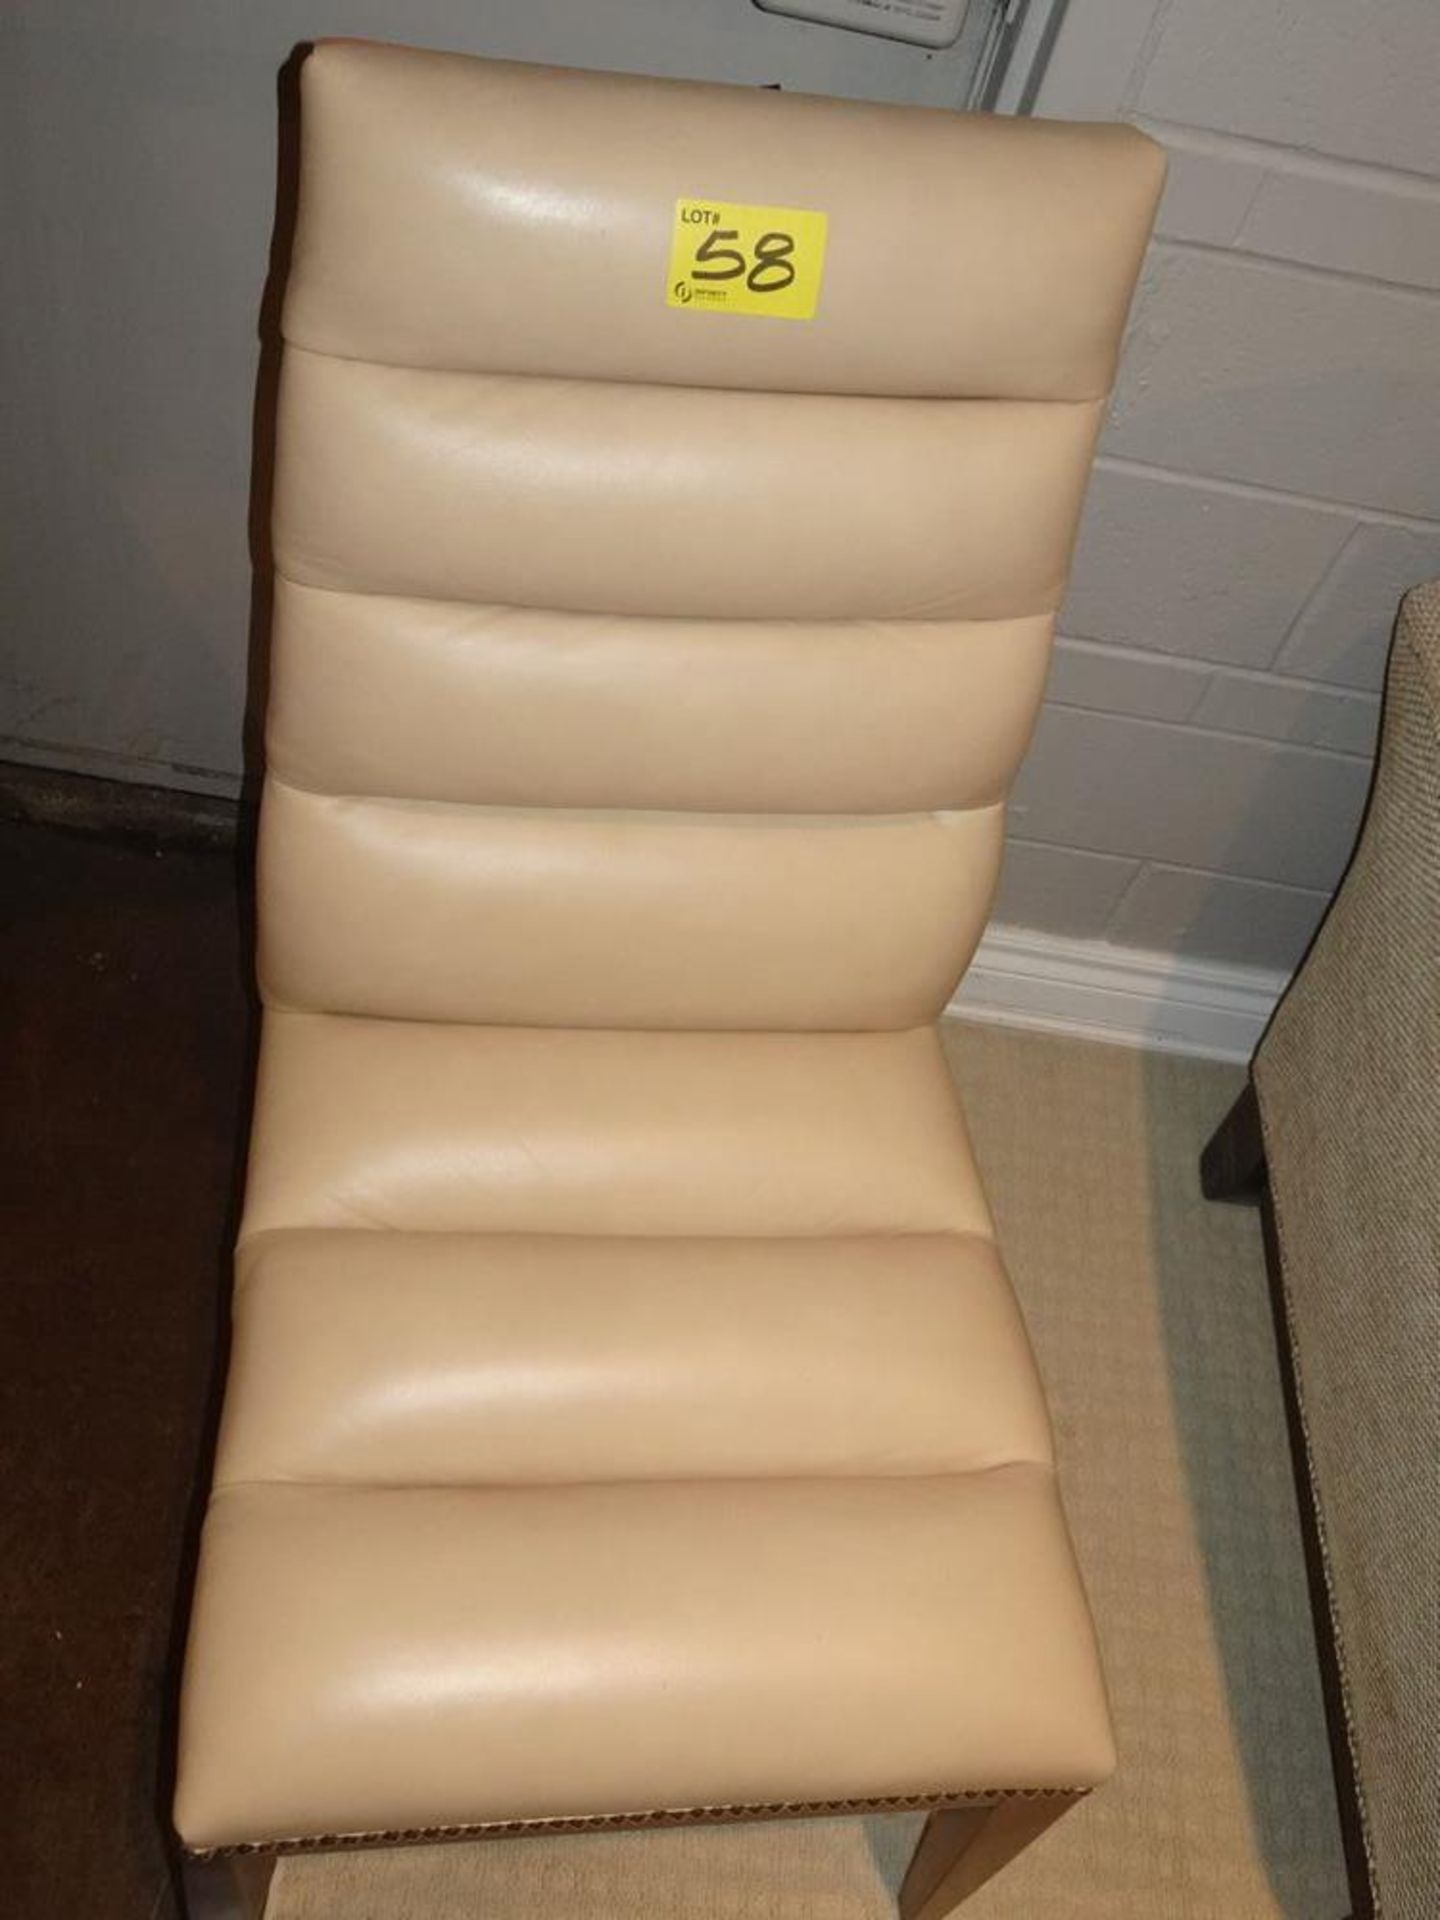 SIDE CHAIR - BEIGE, LEATHER W/ STUDS - Image 4 of 6